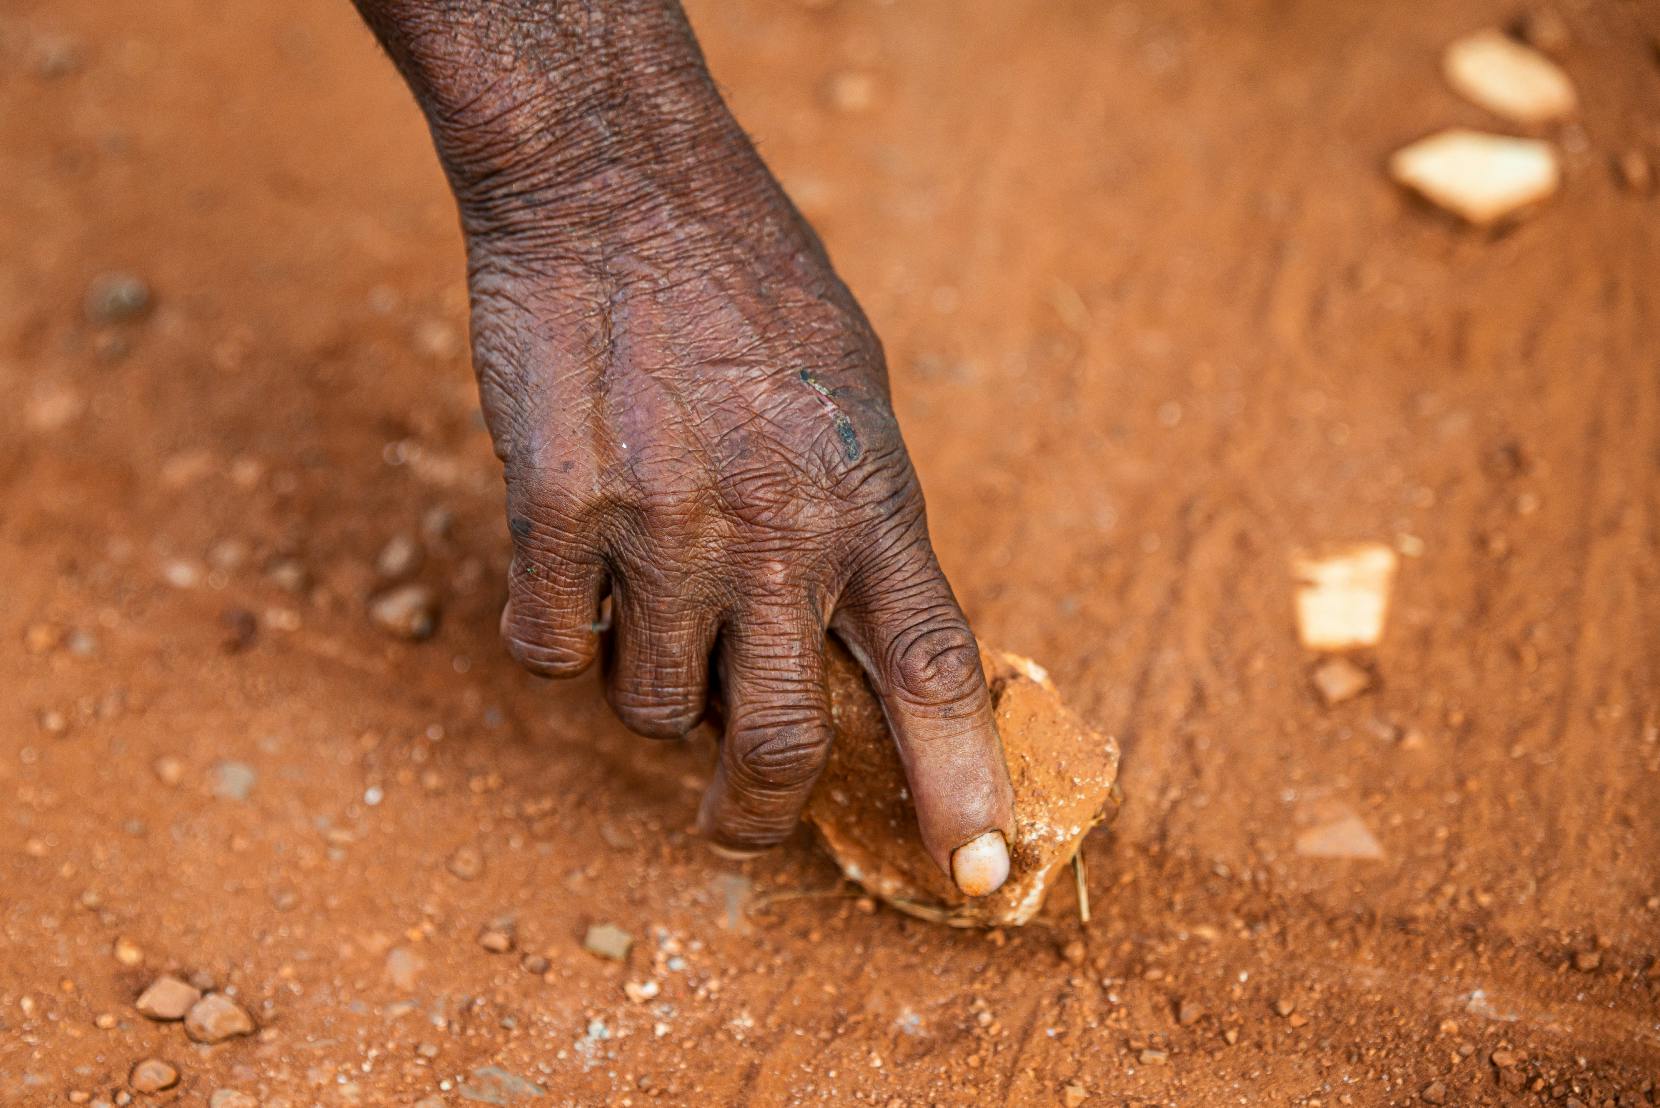 First Nations hand touching red dirt - Explore first-hand experience of First Nations people